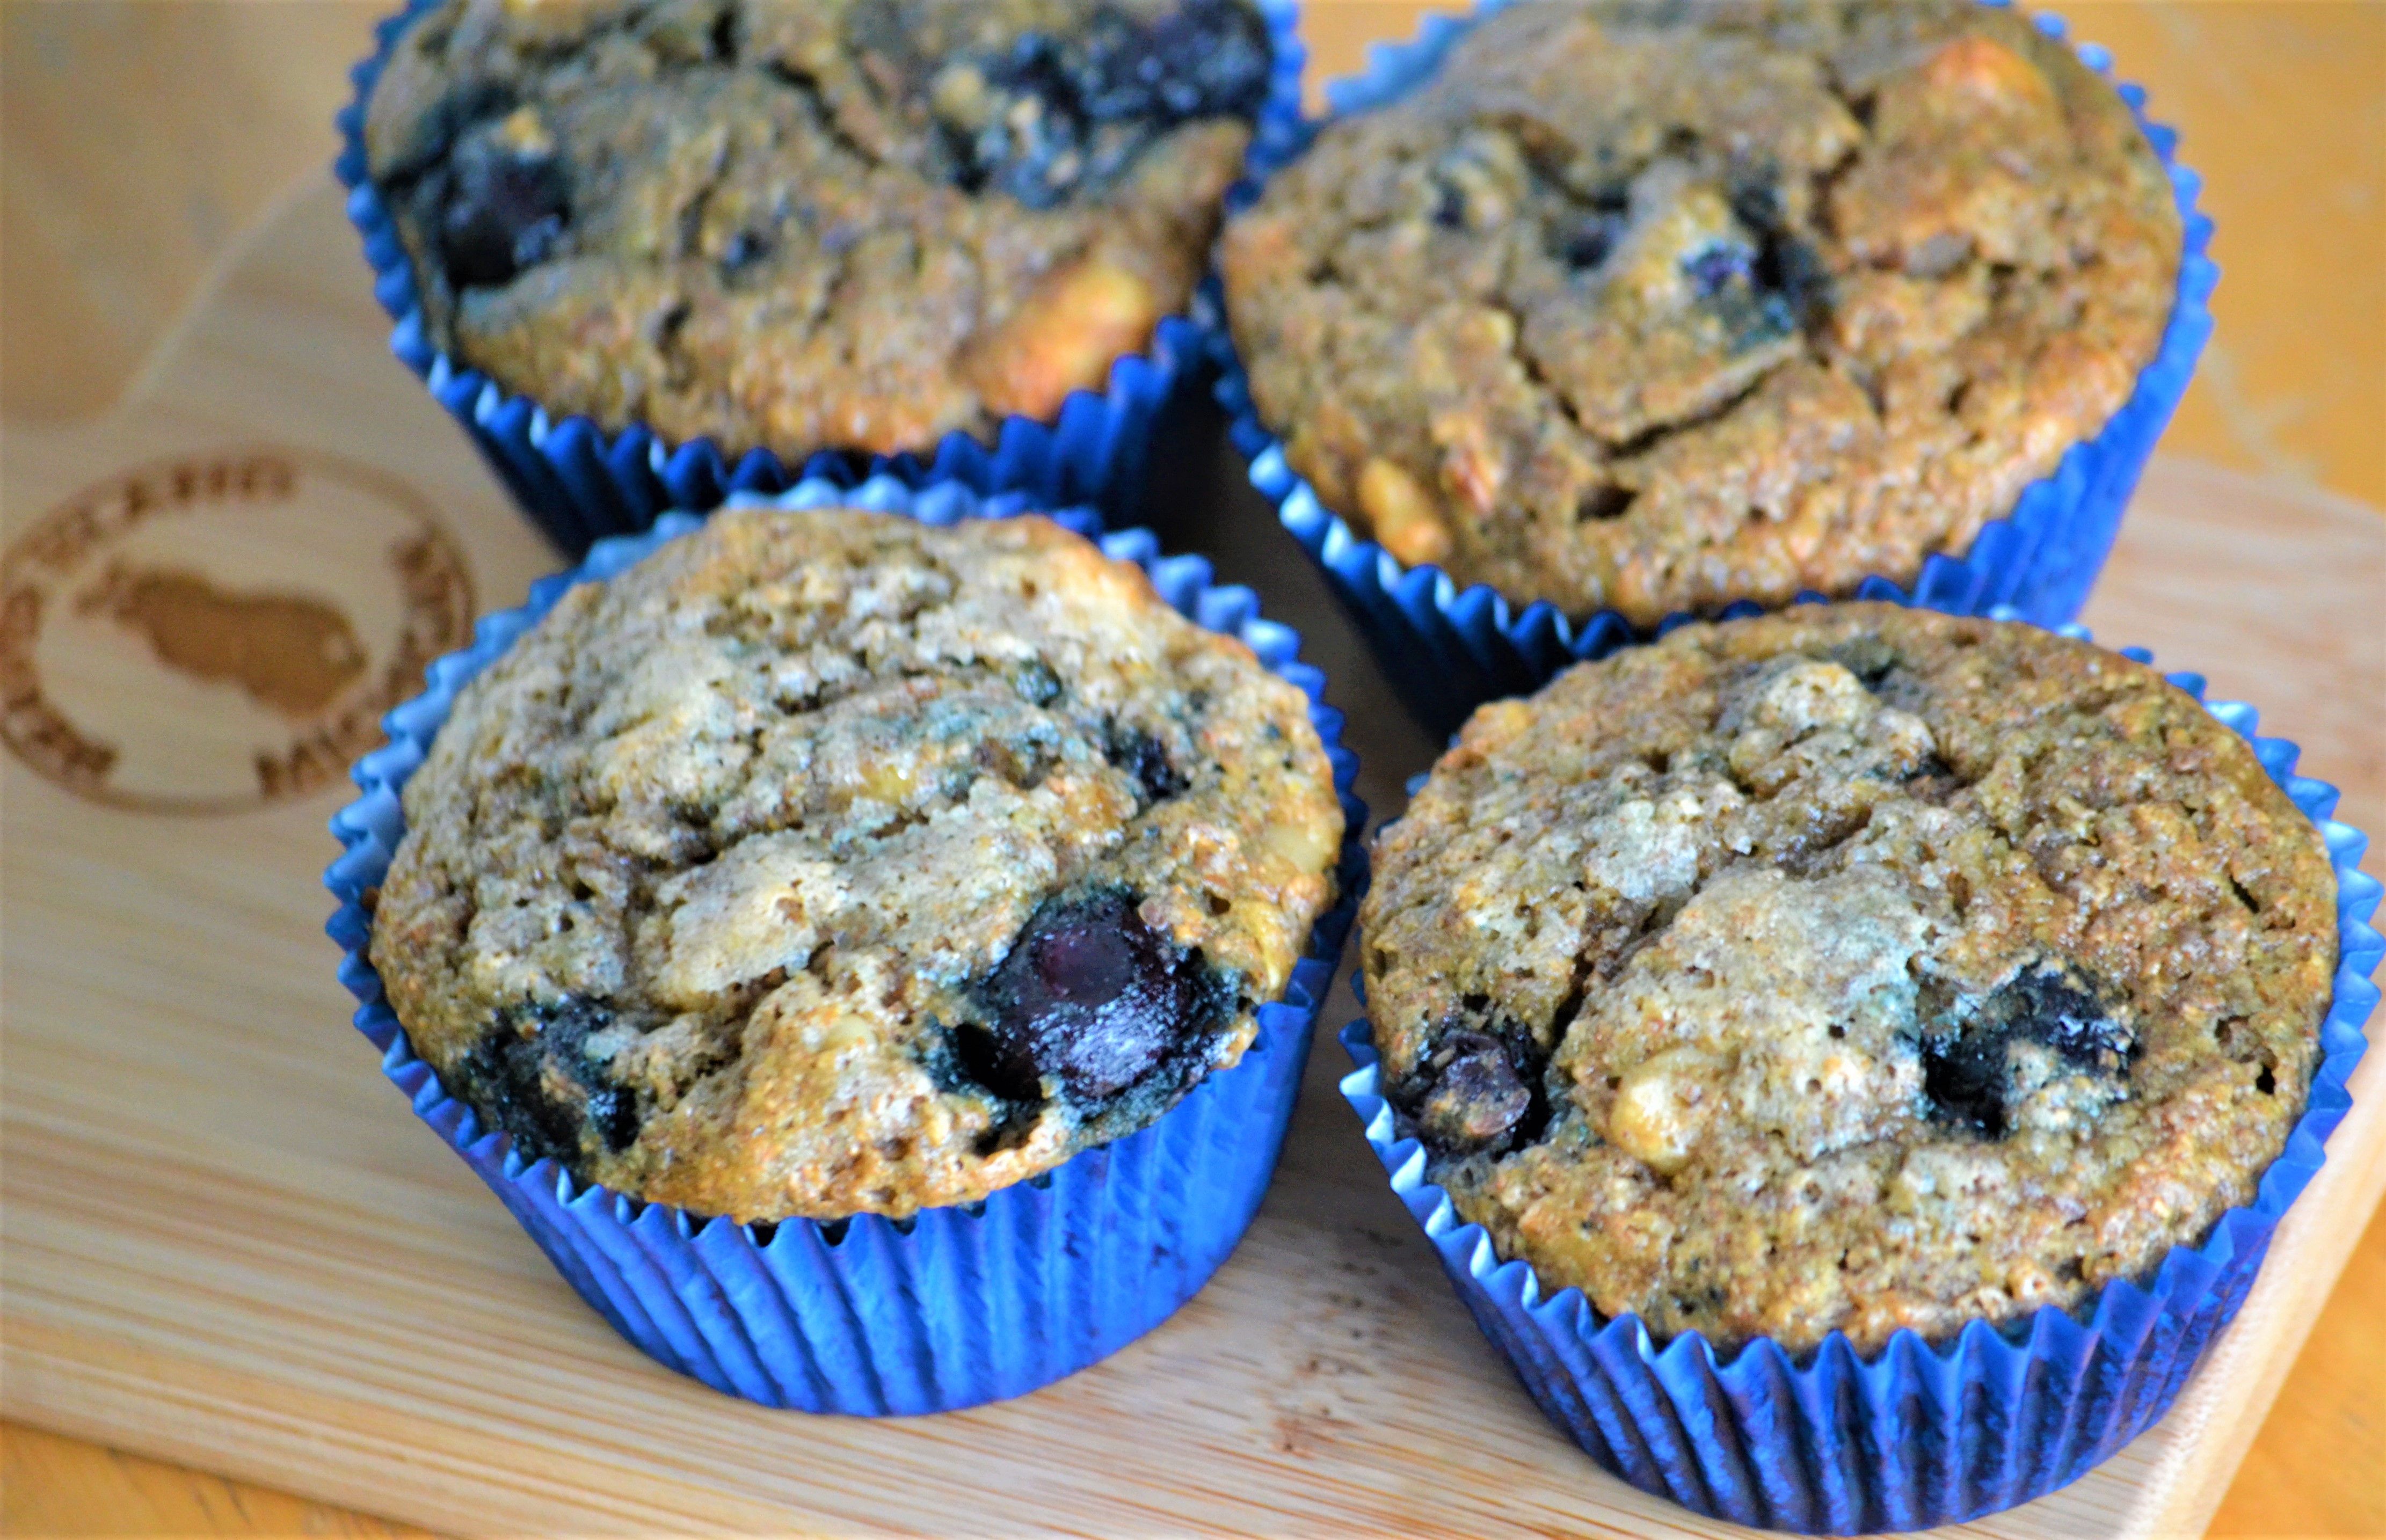 Delicious and Nutritious Whole Wheat Banana and Blueberry Muffins